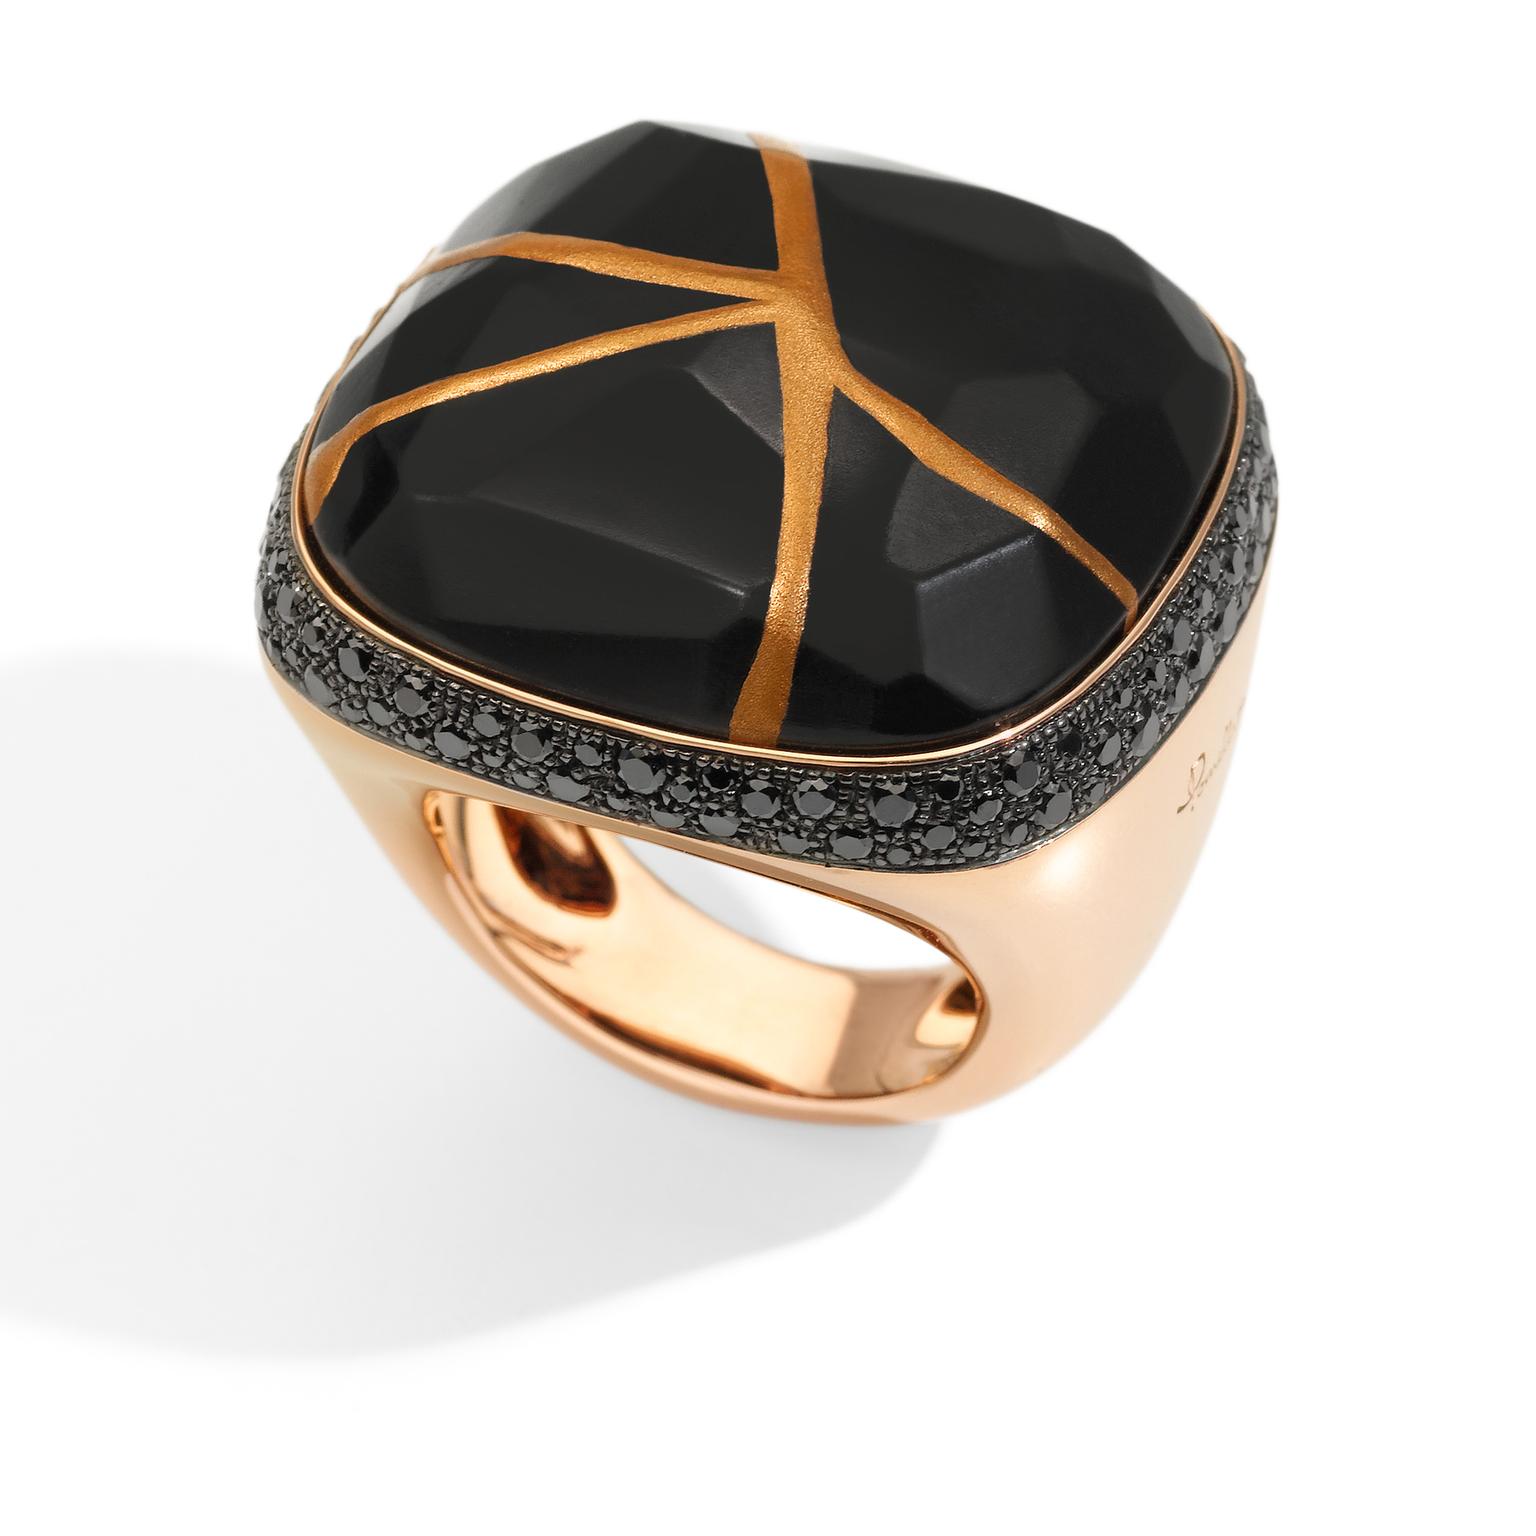 Pomellato Kintsugi Collection_ring in rose gold with jet and balck diamonds